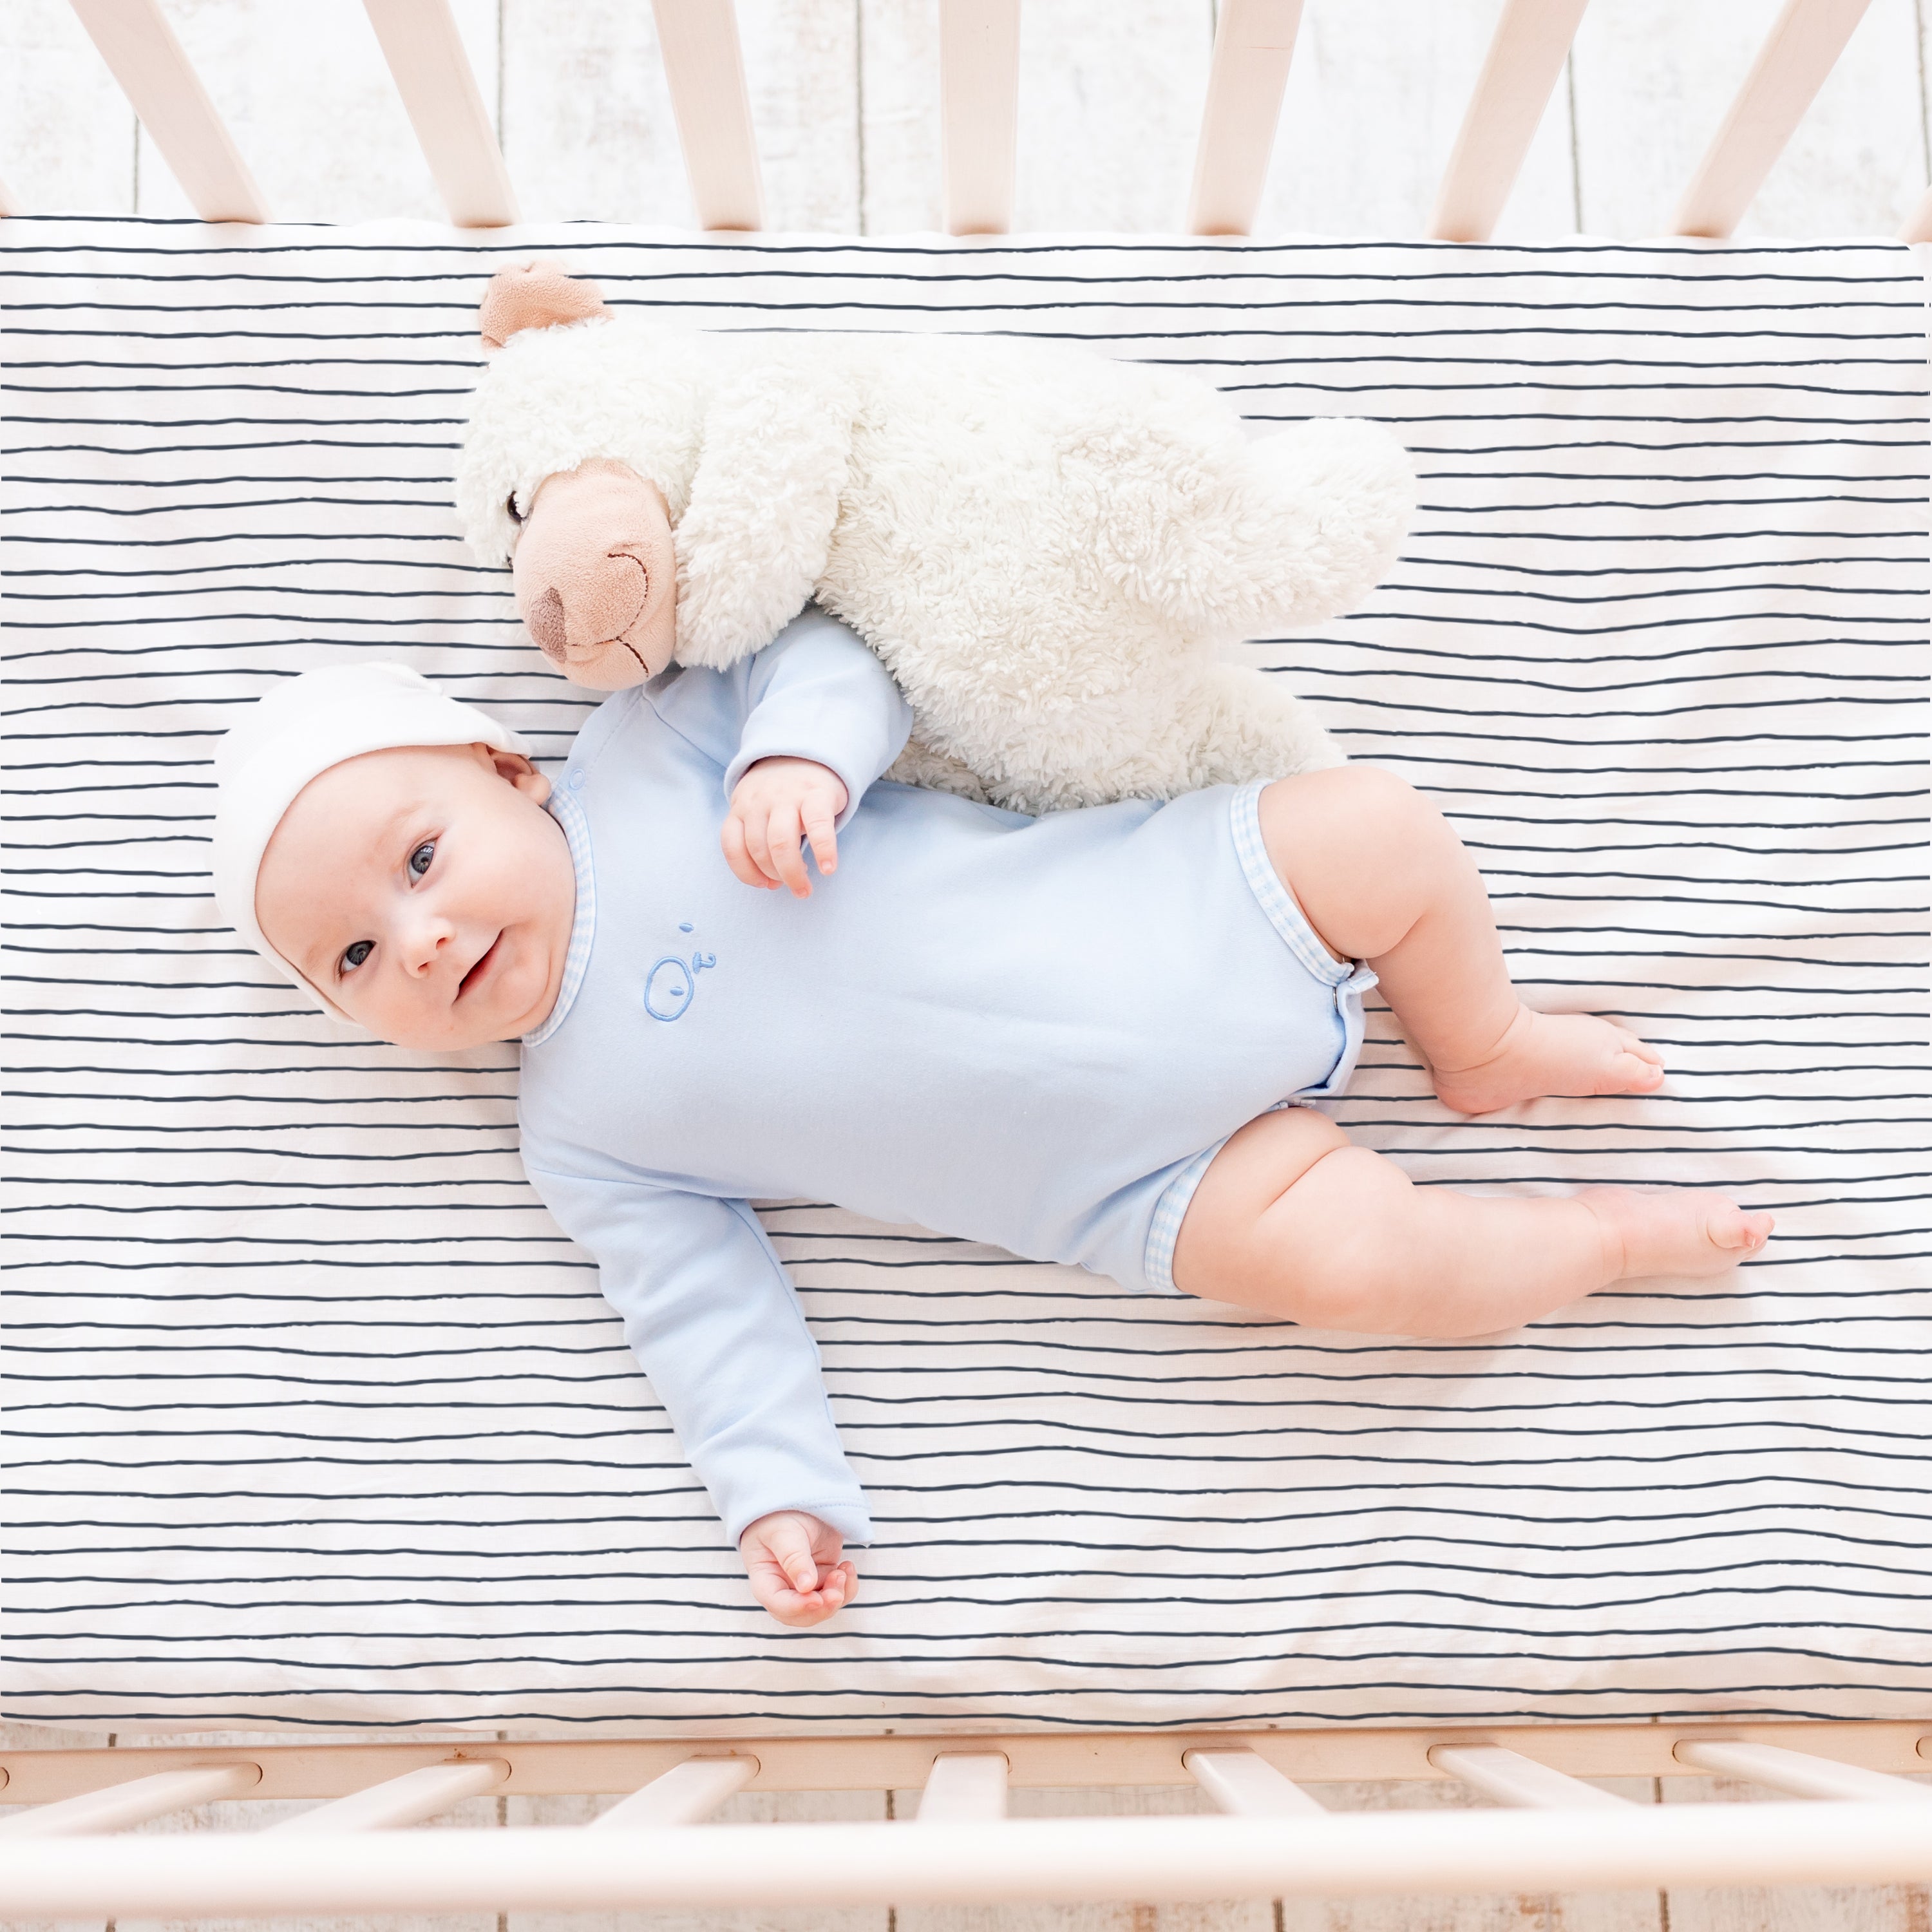 A baby in a blue onesie lies in a Makemake Organics crib with a Cobi Blue Stripes fitted sheet and pillowcase, accompanied by a plush teddy bear on its side. The baby is looking up and smiling, wearing a white headband.